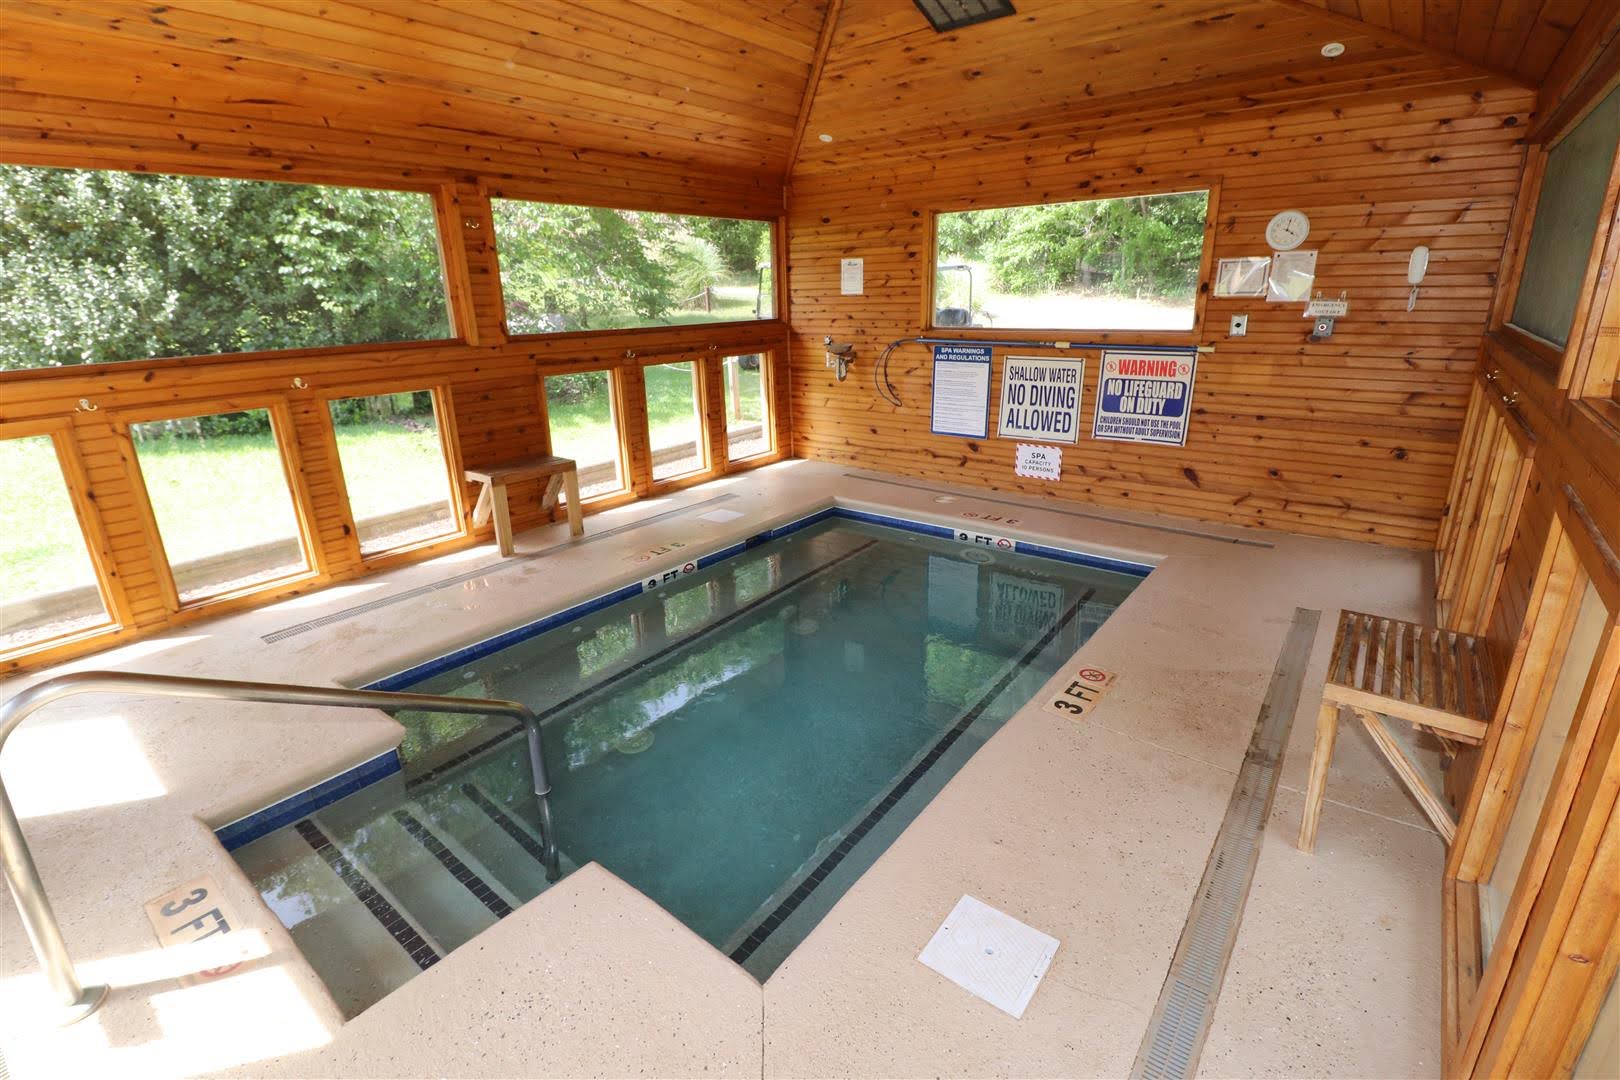 Picture of Inside the Hot Tub Building